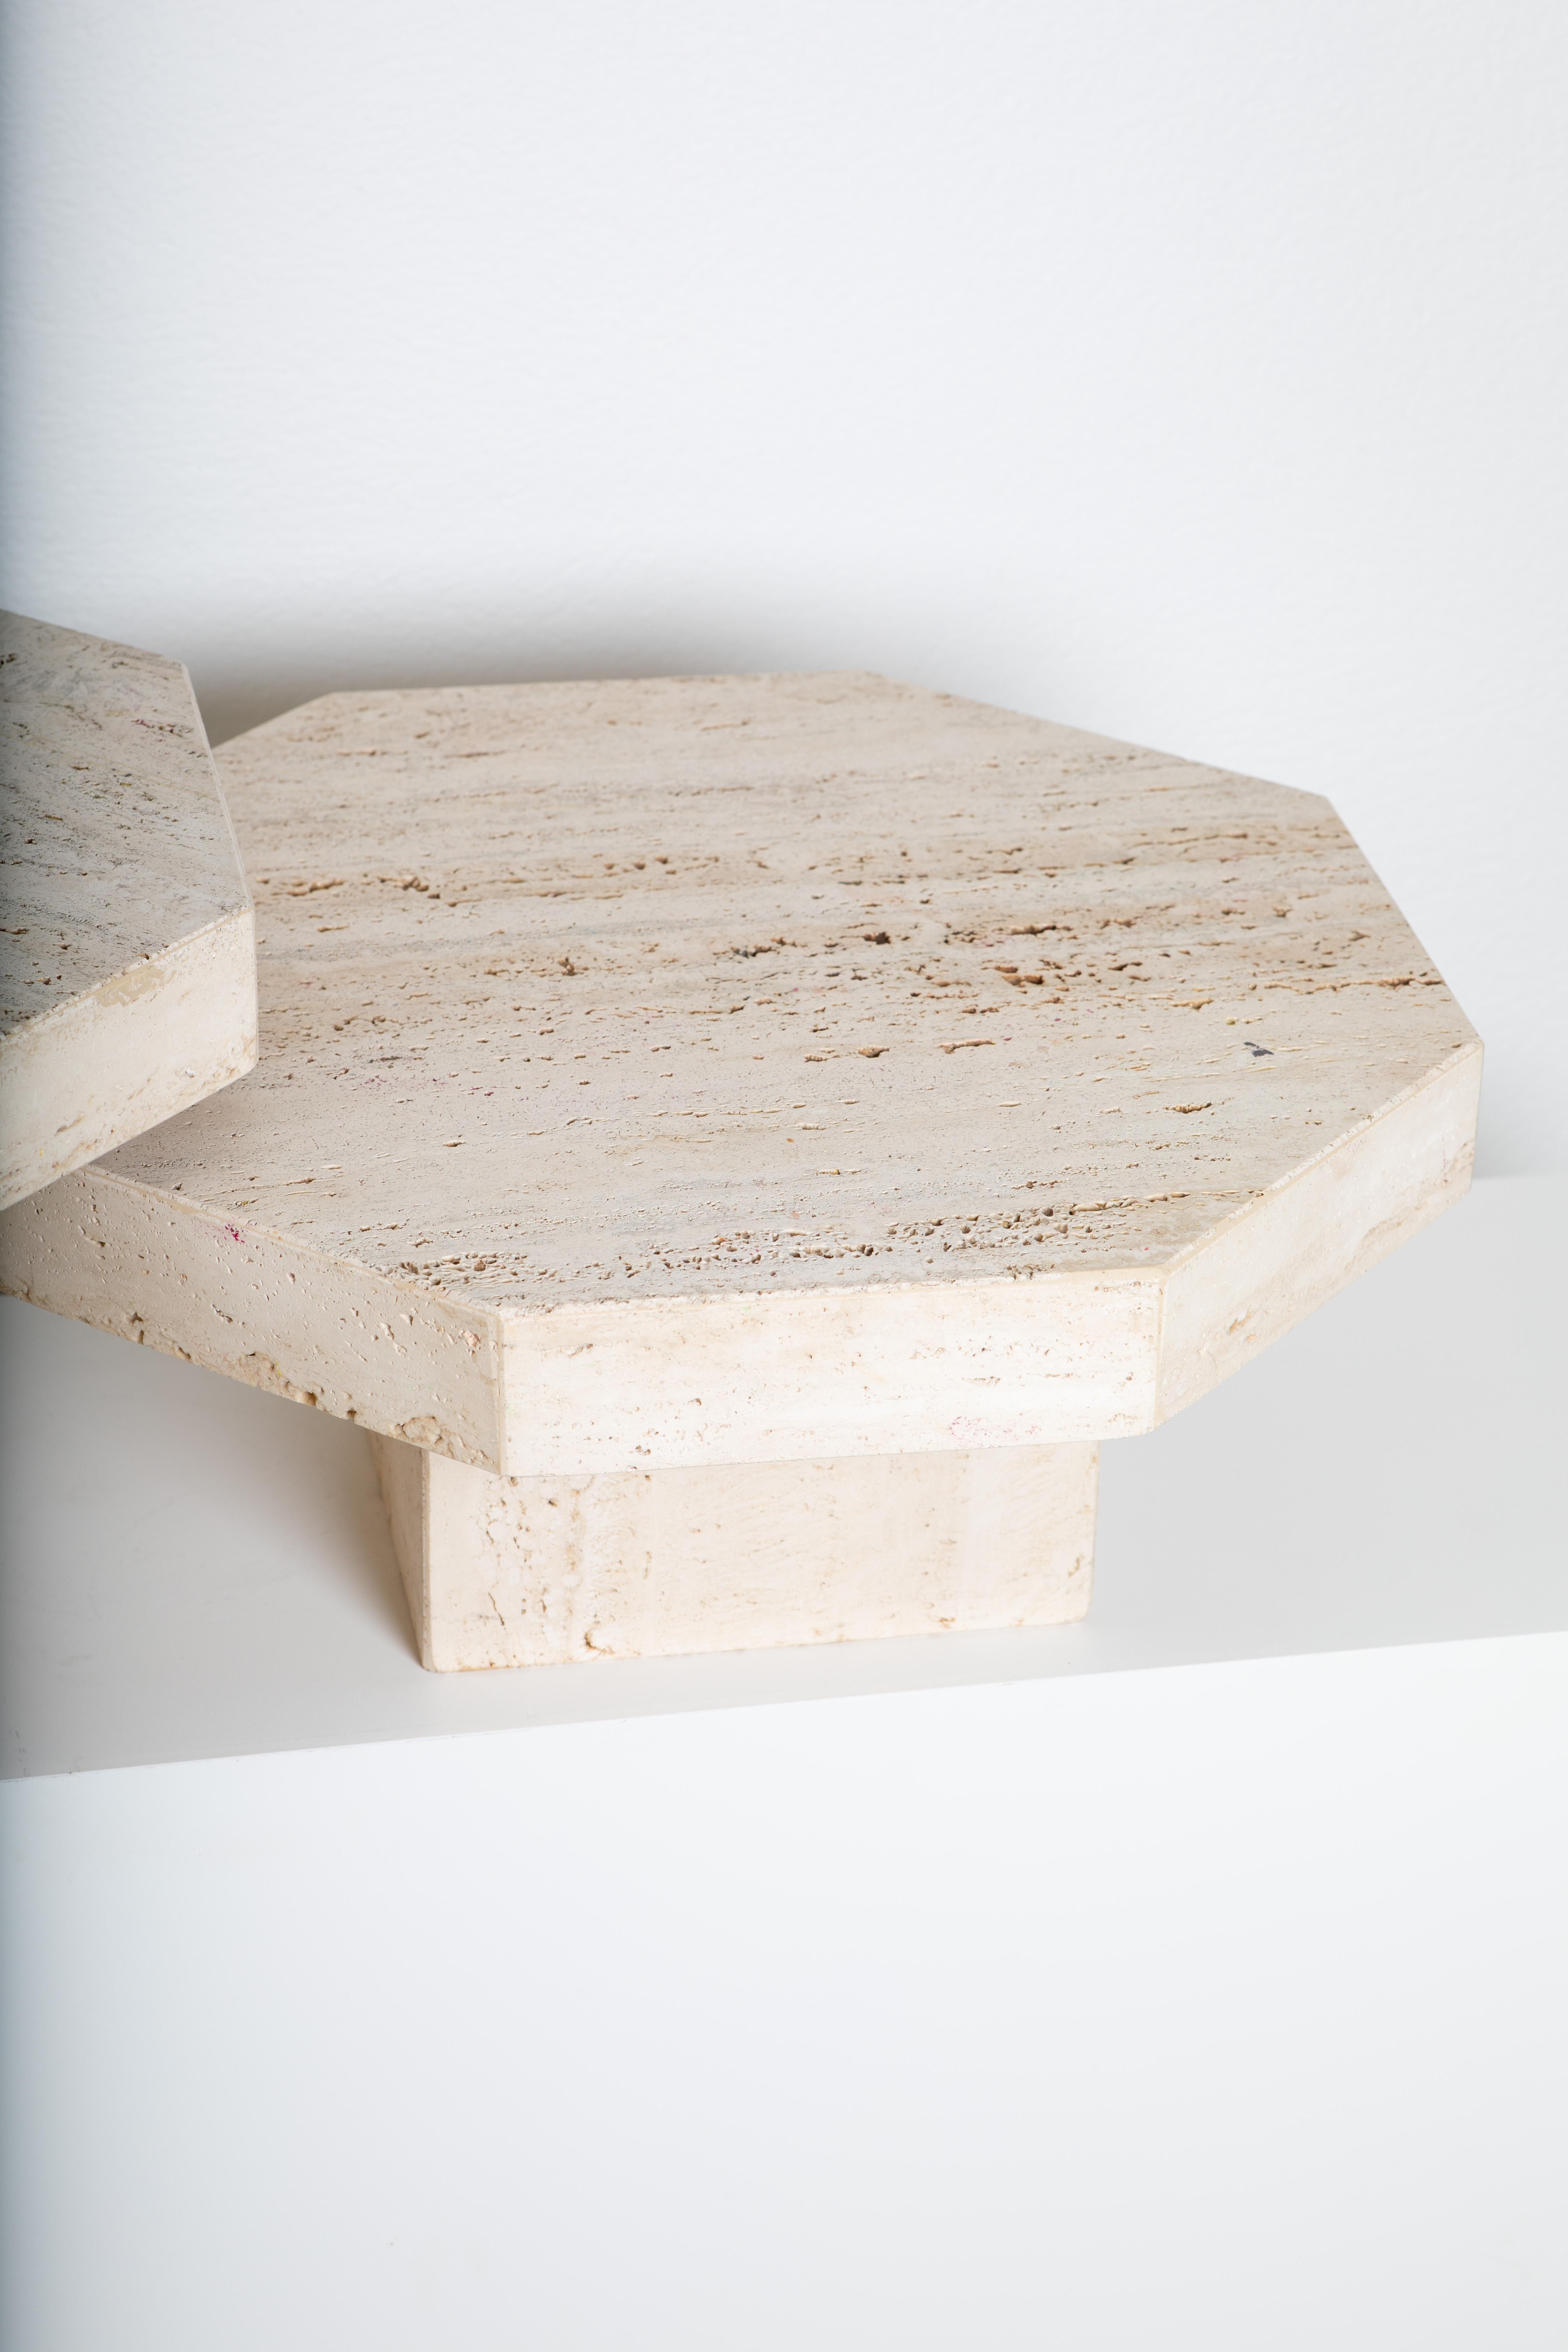 Pair of Octogonal Travertine Tables In Excellent Condition For Sale In Collonge-Bellerive, GE